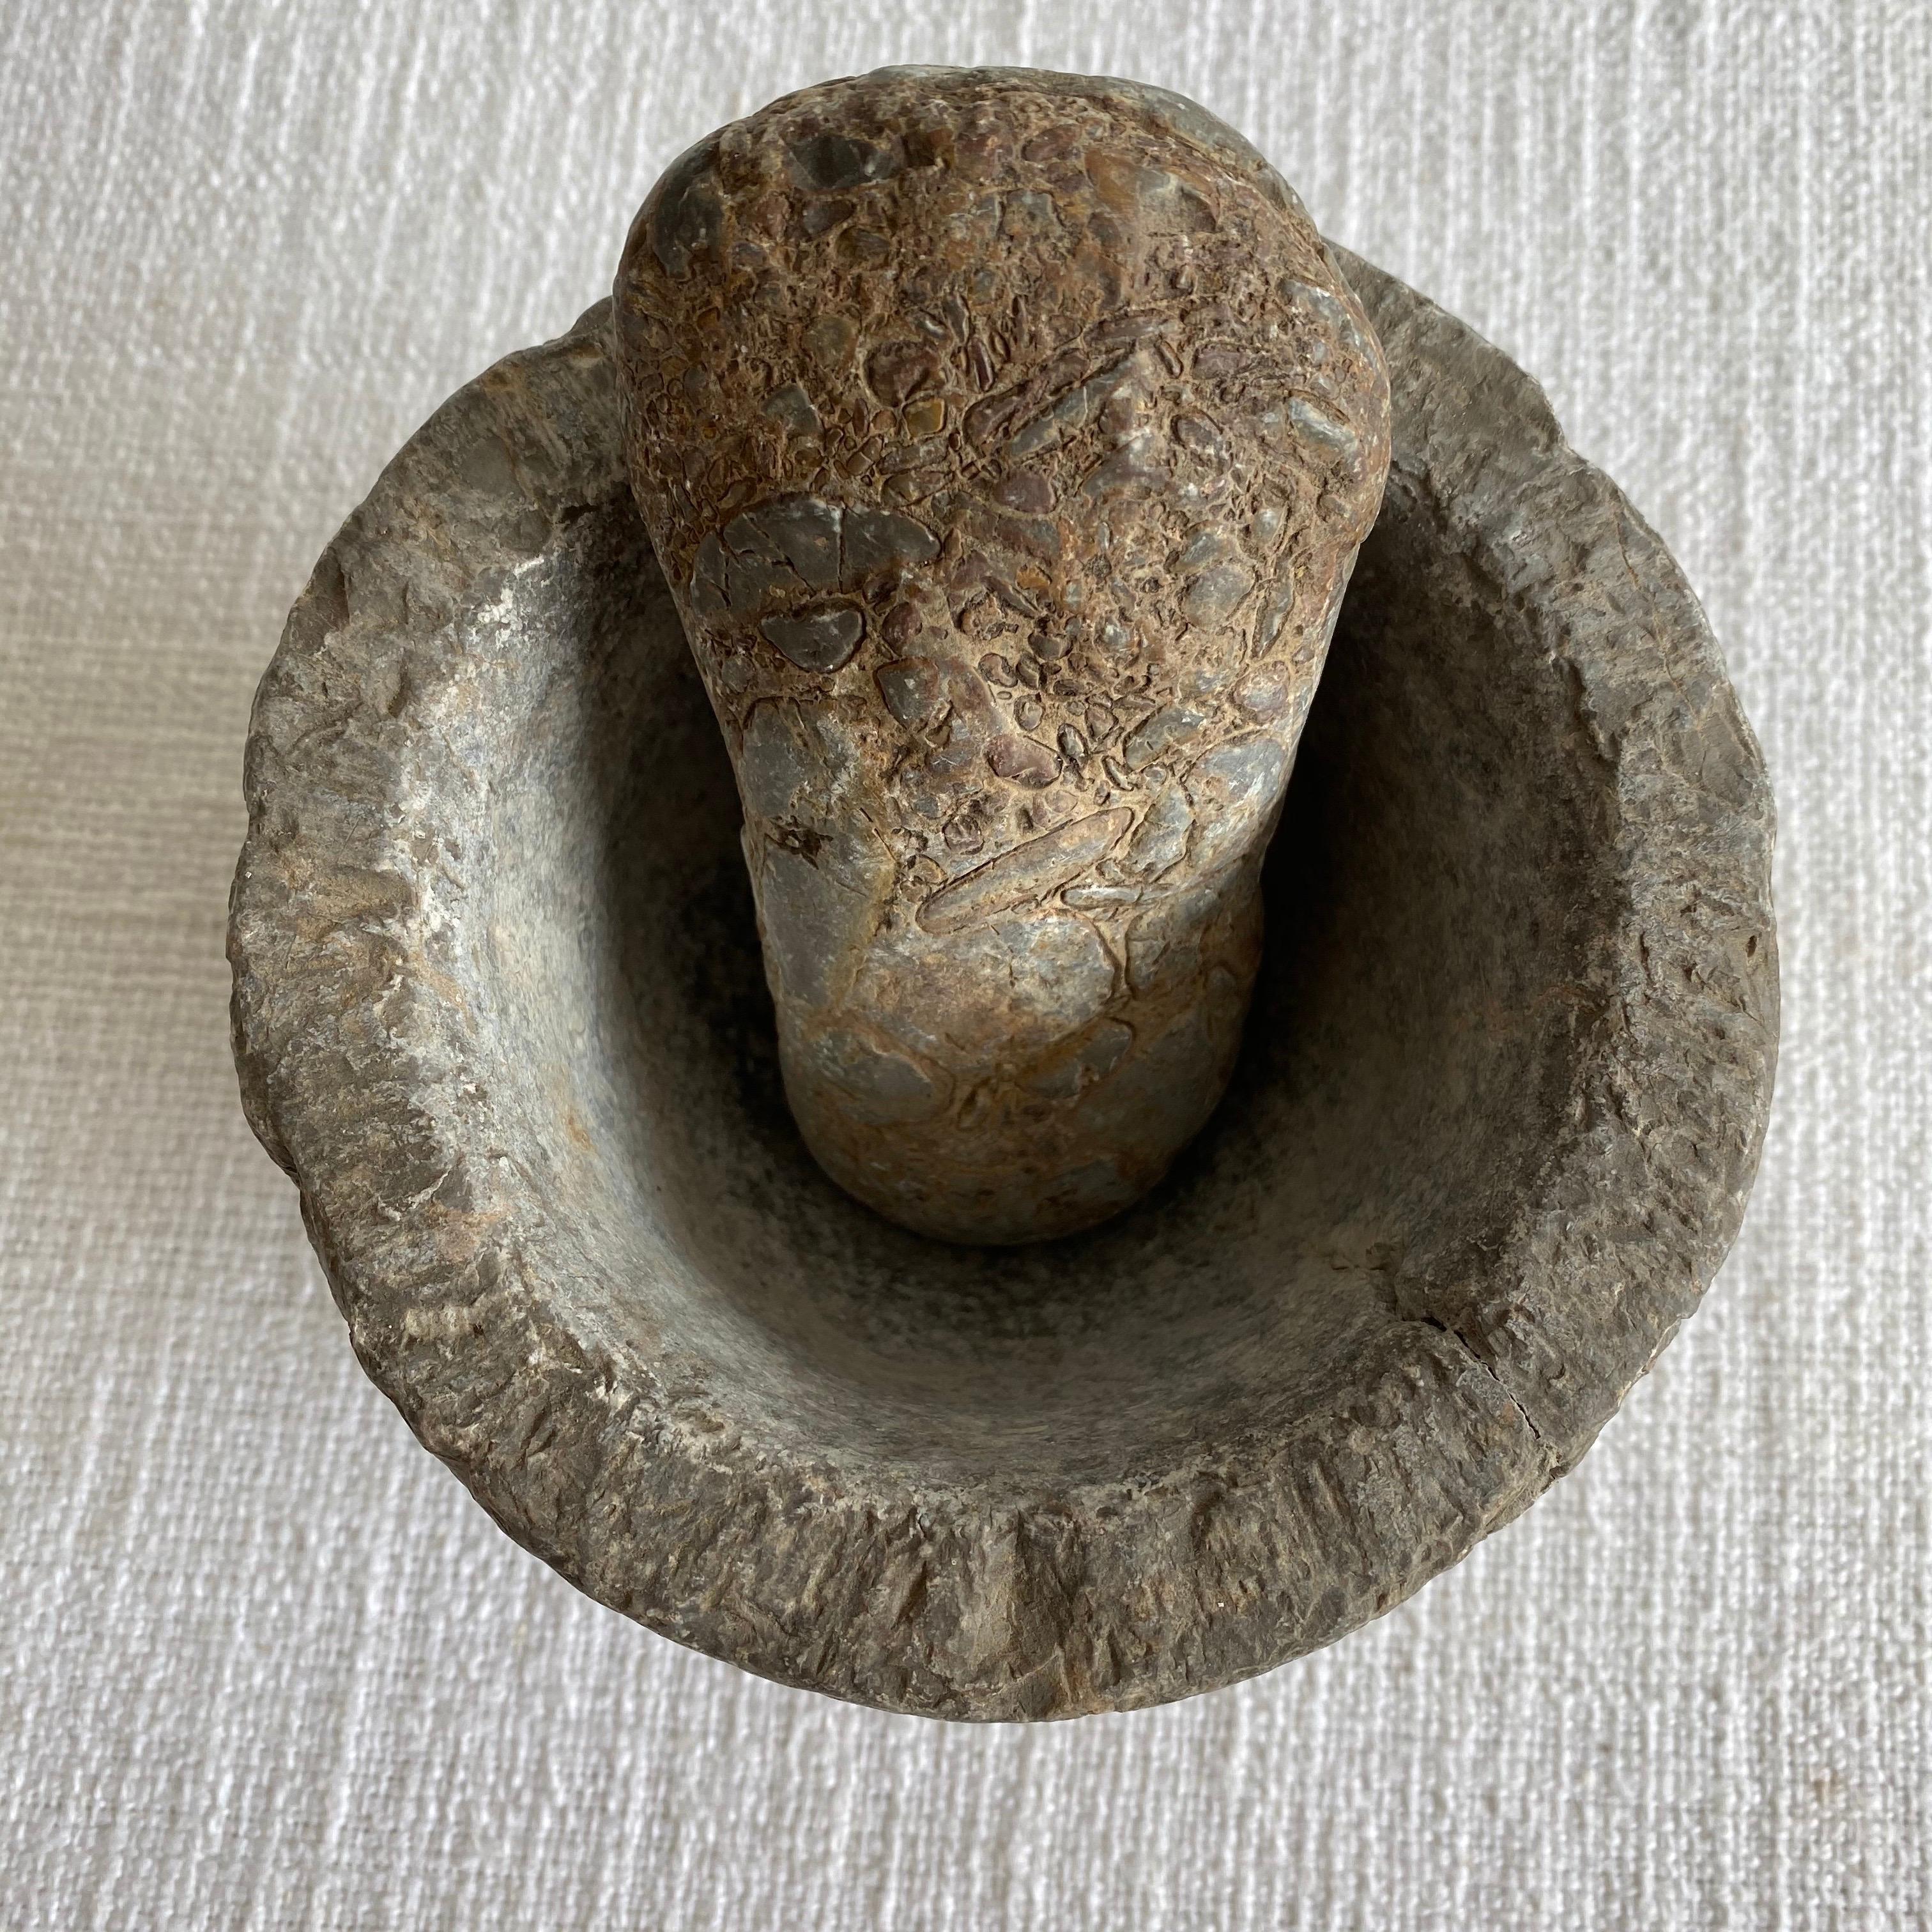 Antique stone mortar and pestle set, solid heavy stone, use as decoration, or for everyday use.
Size: 6” D x 4.5”
Weight: 10lbs.